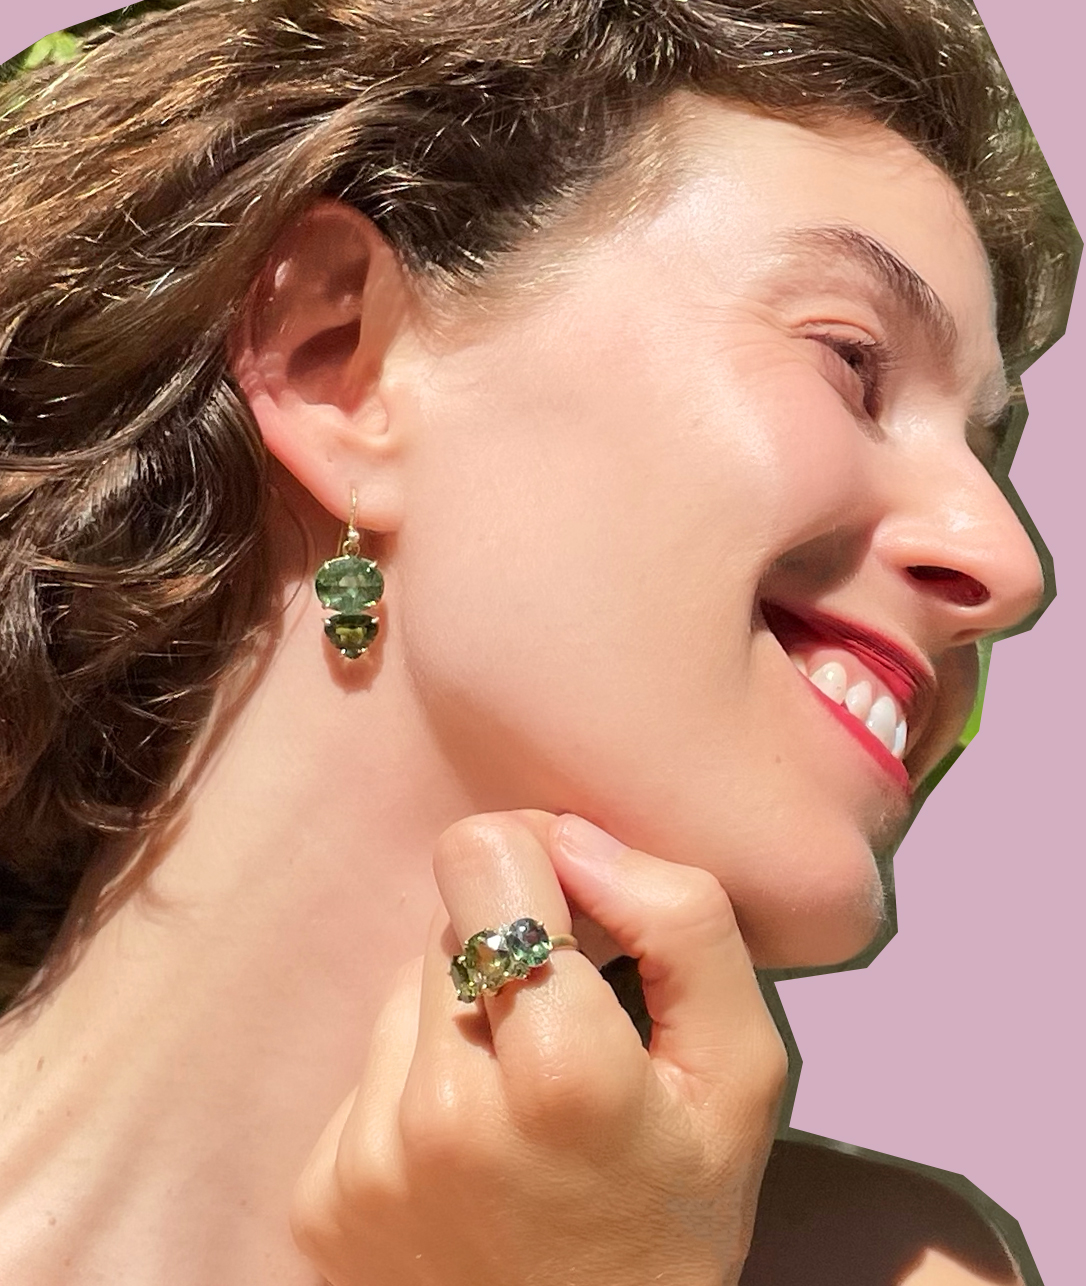                                                 For days that need a boost of color, let Double Drop earrings brighten the outlook. Pairs well with brunch invitations and walks in the park.SHOP DOUBLE DROP EARRINGS
            
            
            